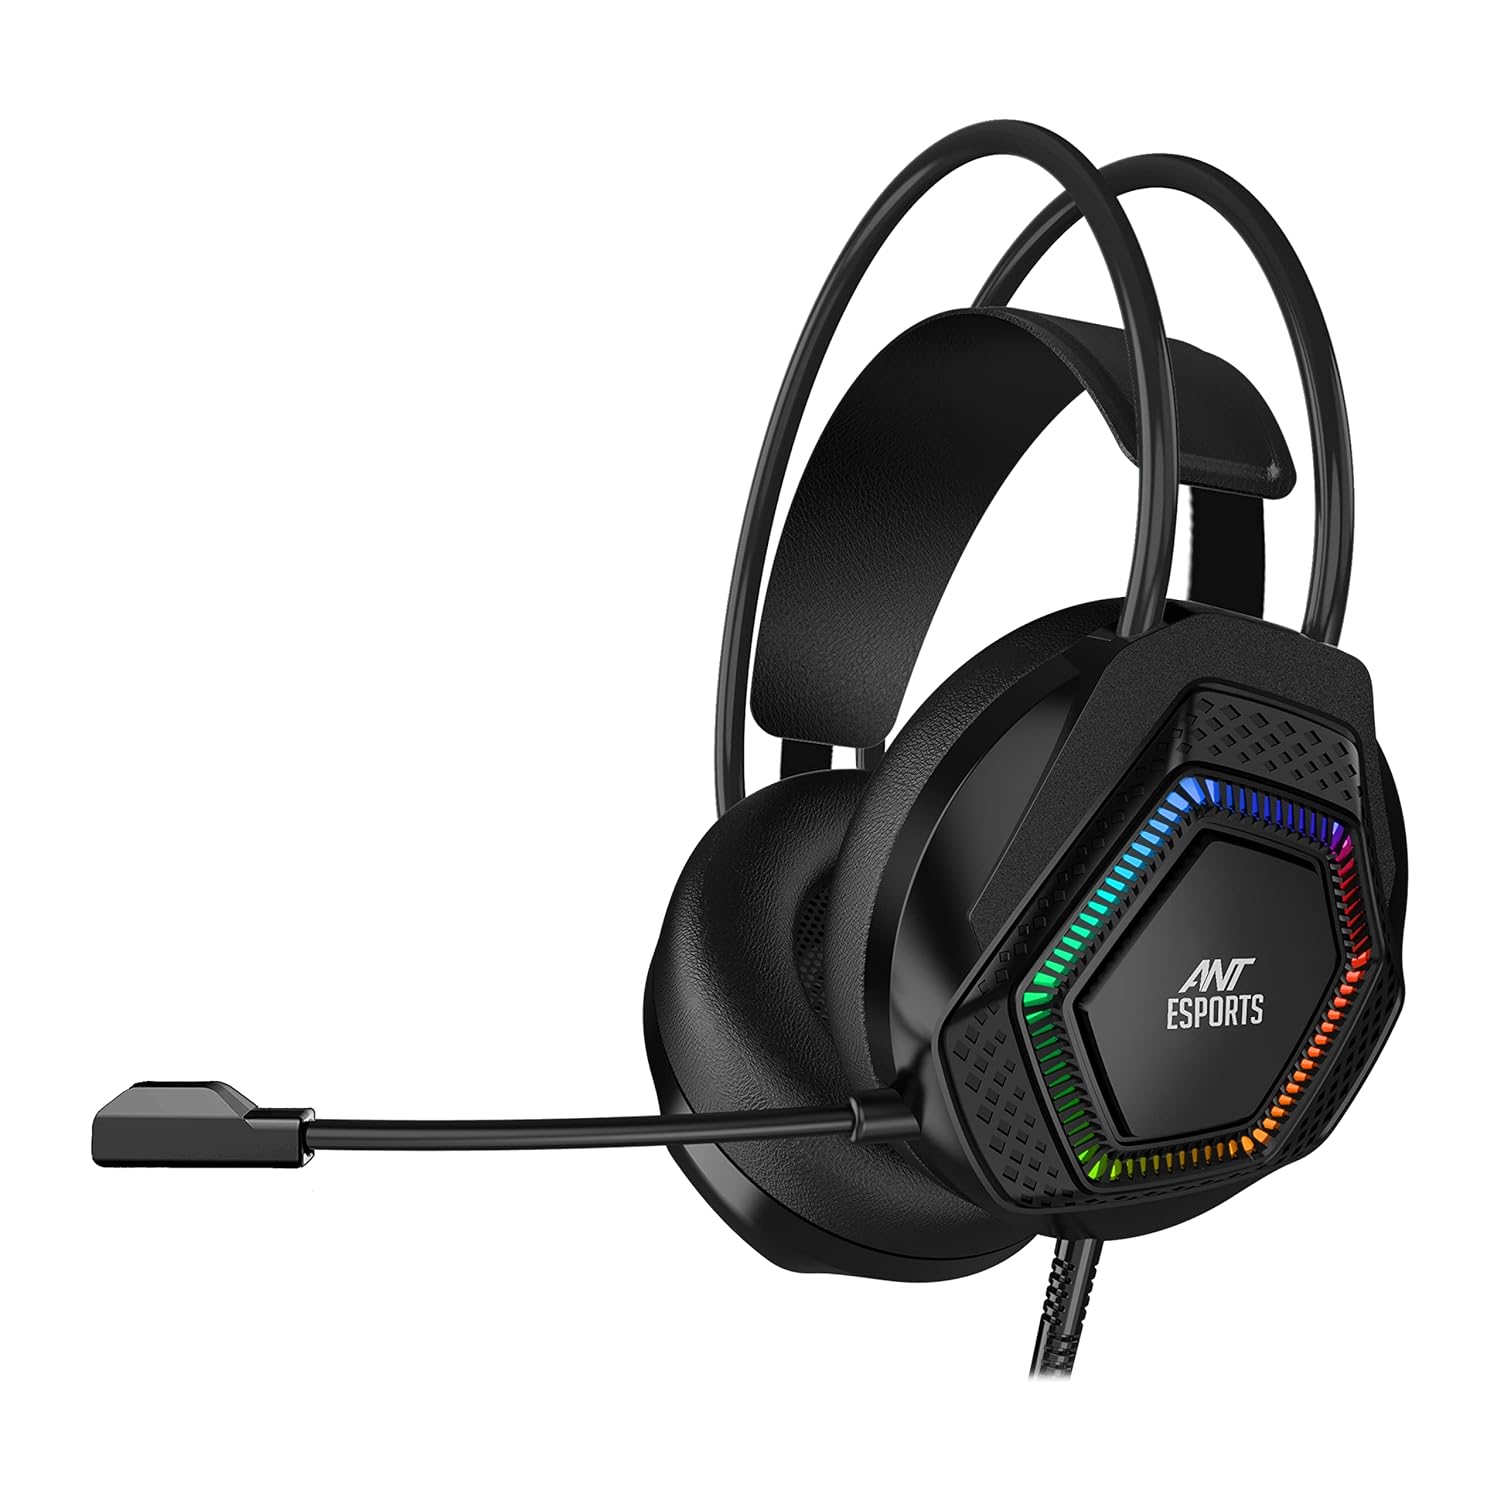 Ant Esports H560 RGB Gaming Headset - Black 2M Cable USB+3.5mm Omni Directionality 1 Year Warranty